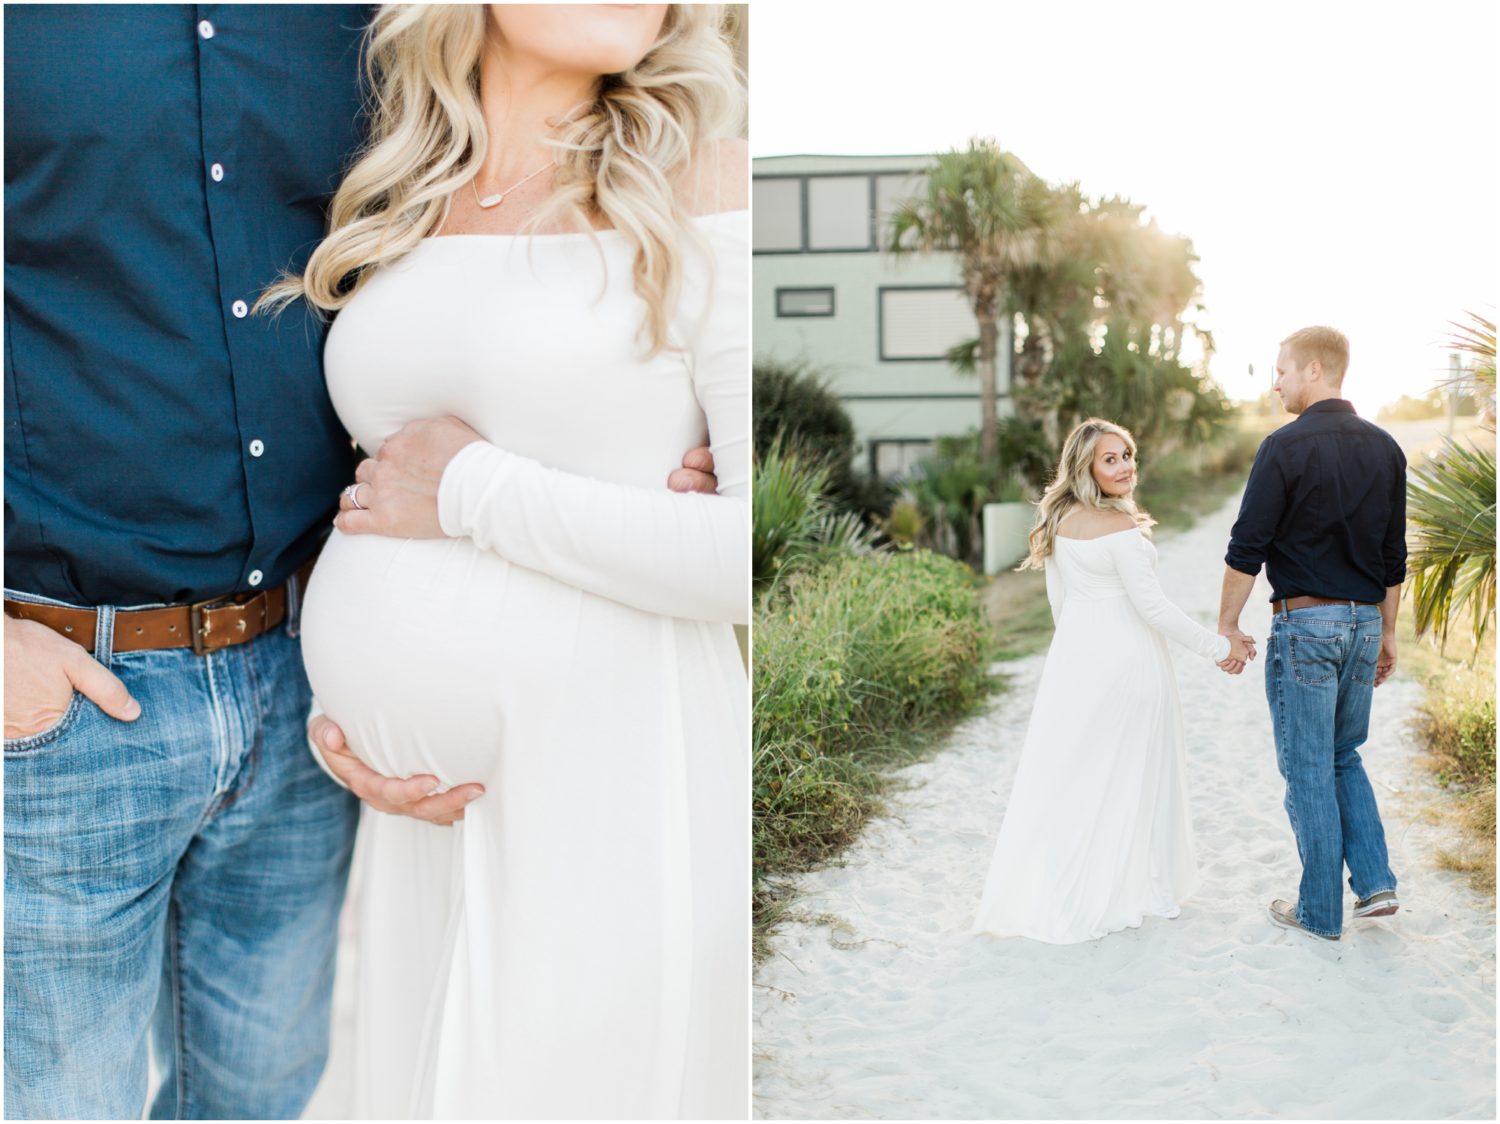 Jacksonville Lifestyle Photographers, Brooke Images, Larissa and Darren's Lifestyle Session, Maternity Session, Beach Session